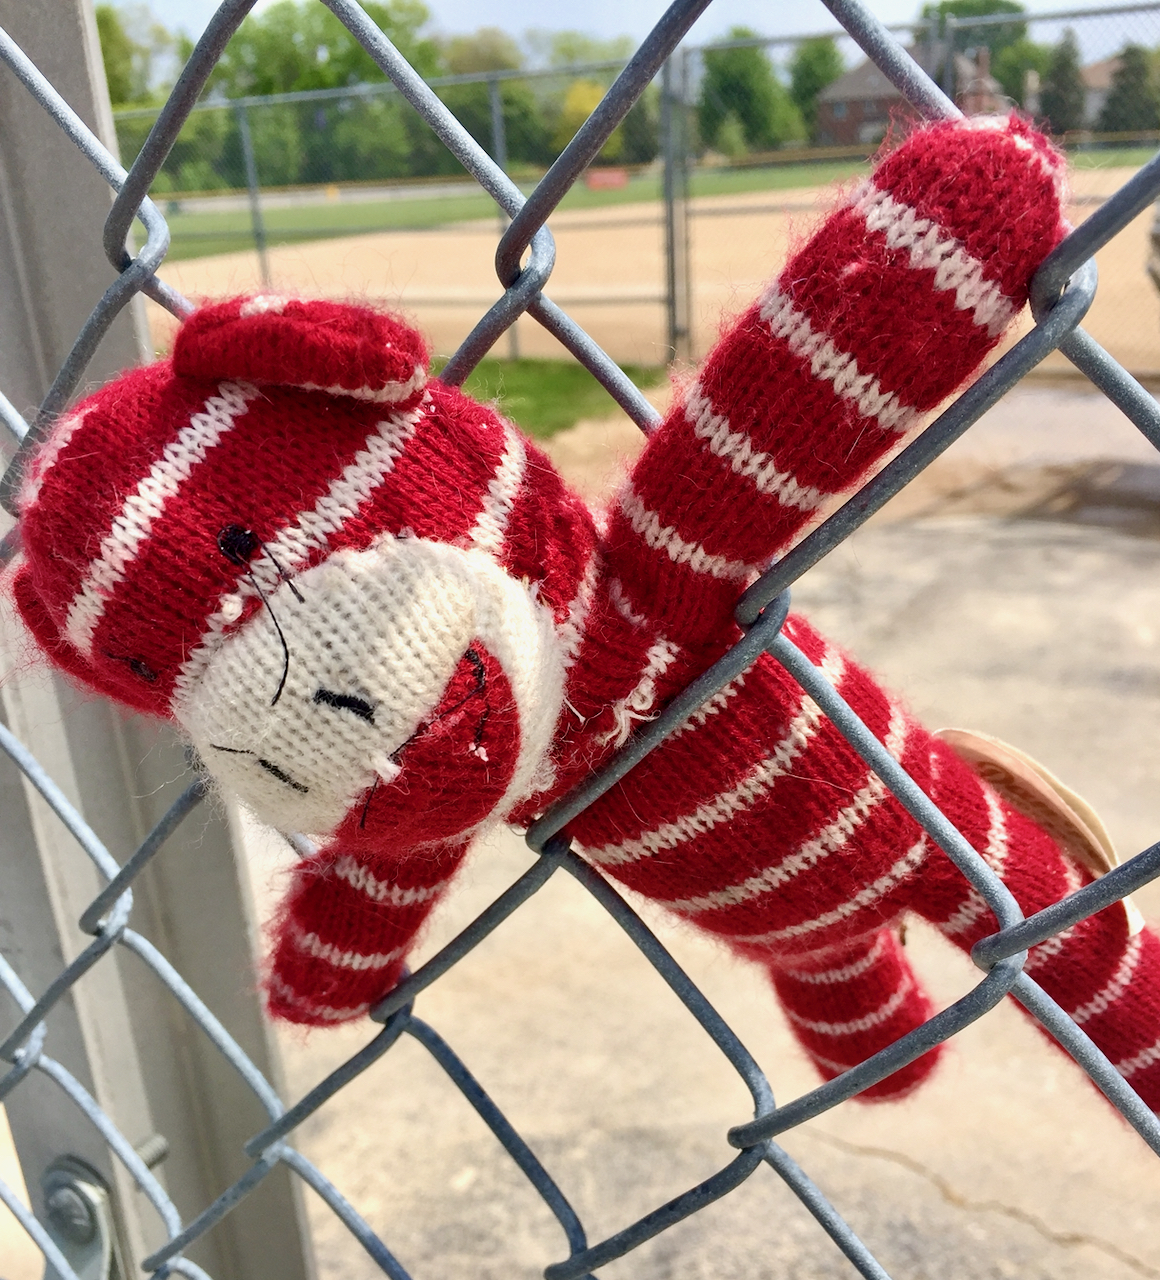 A stuffed animal caught in a fence.